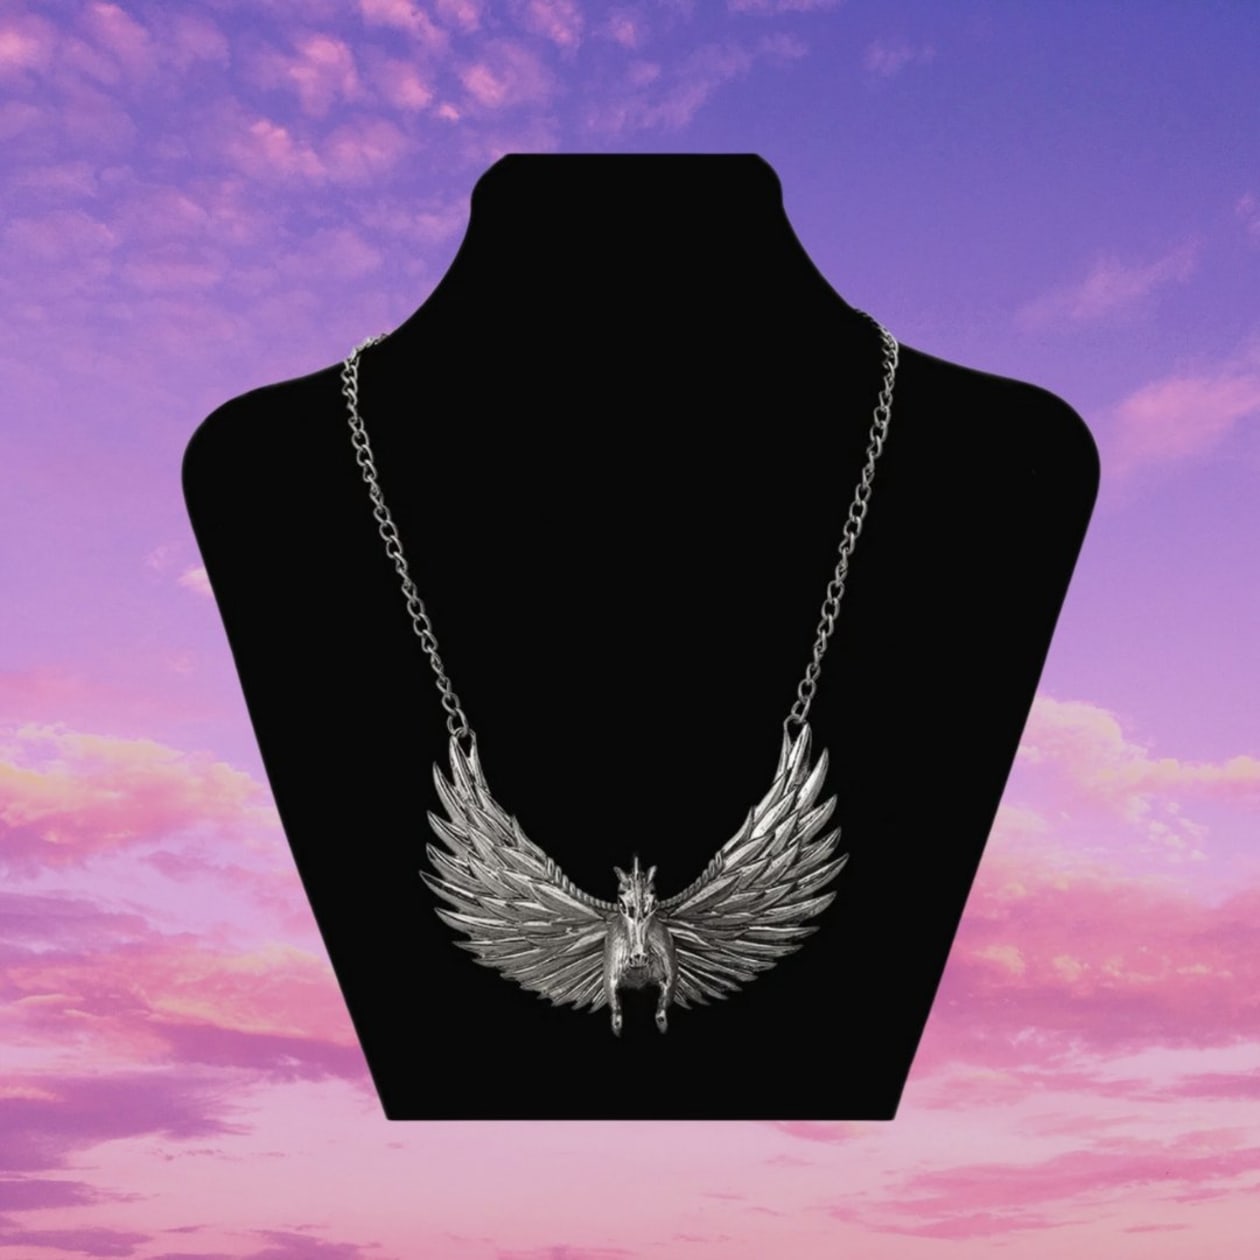 Aggressive Pegasus Statement Necklace in Silver or Gold - Color: Silver